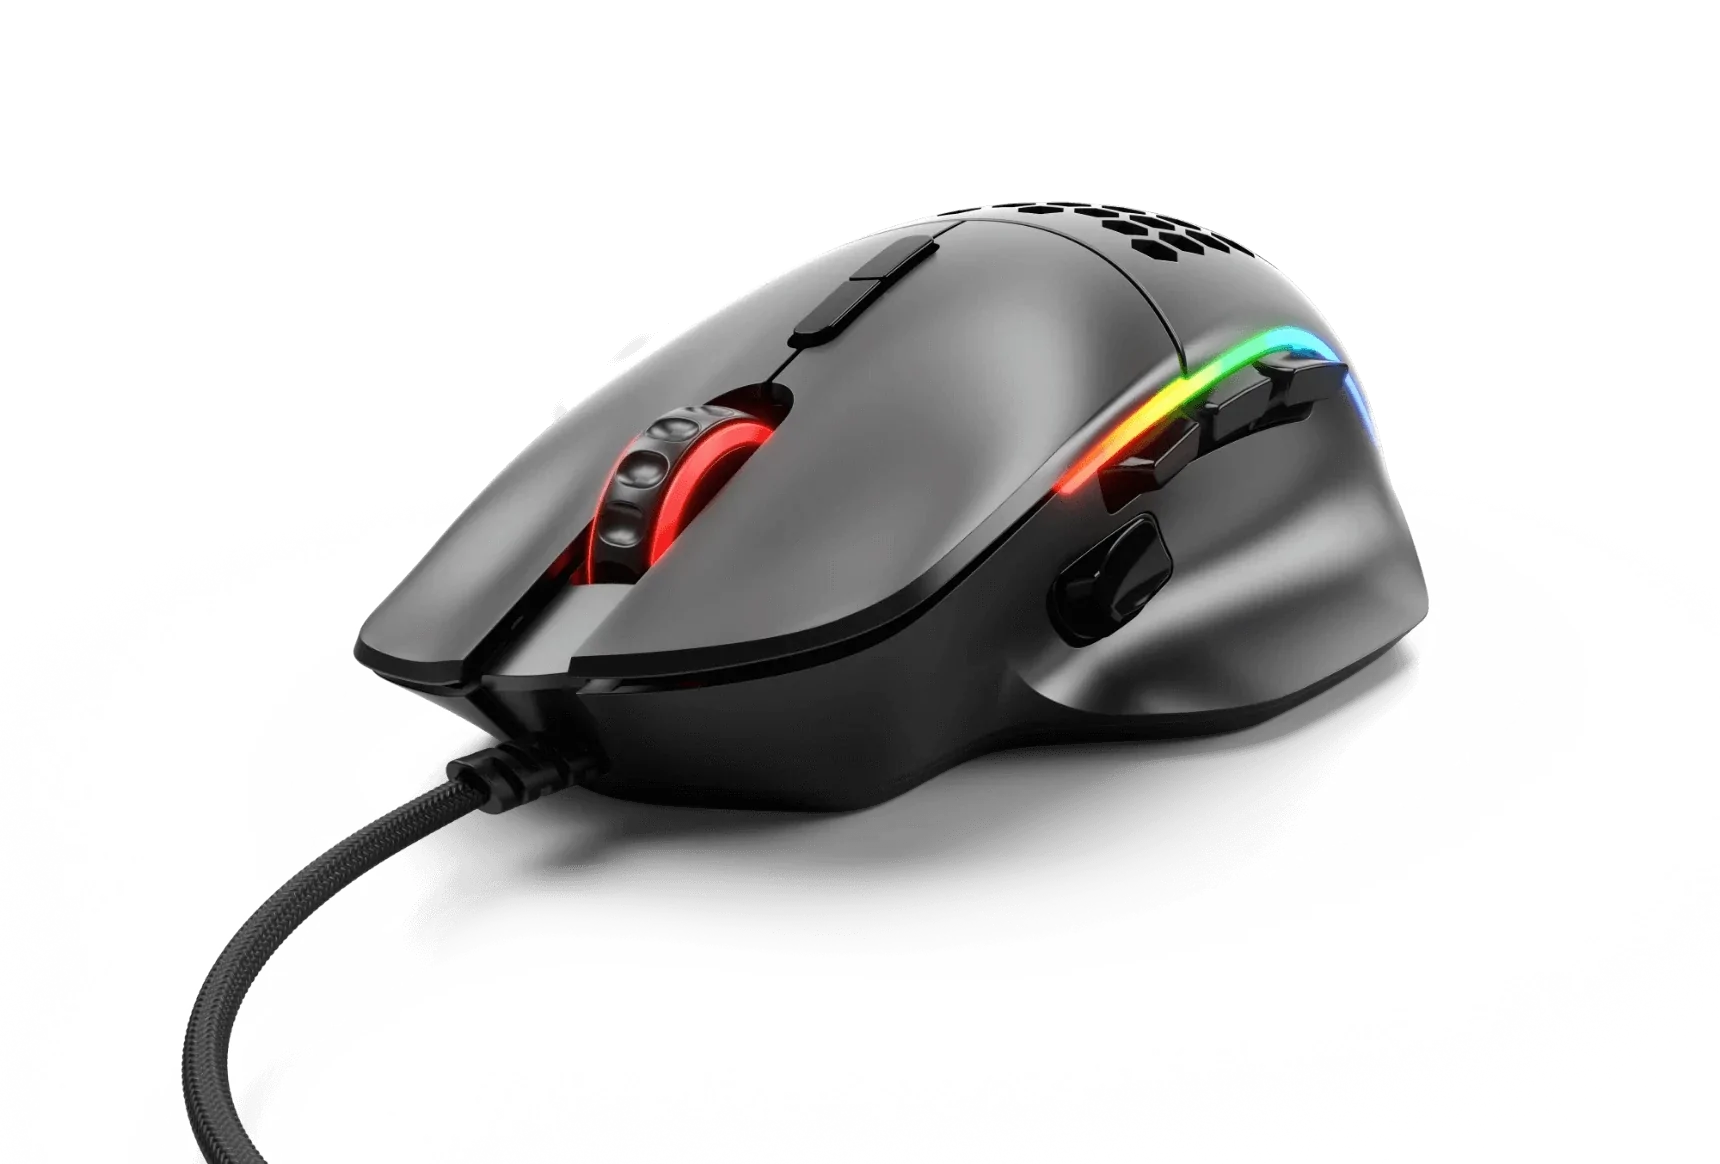 Glorious Gaming Mouse Model I - Matte Black - Think24 Gaming & Gadgets Qatar